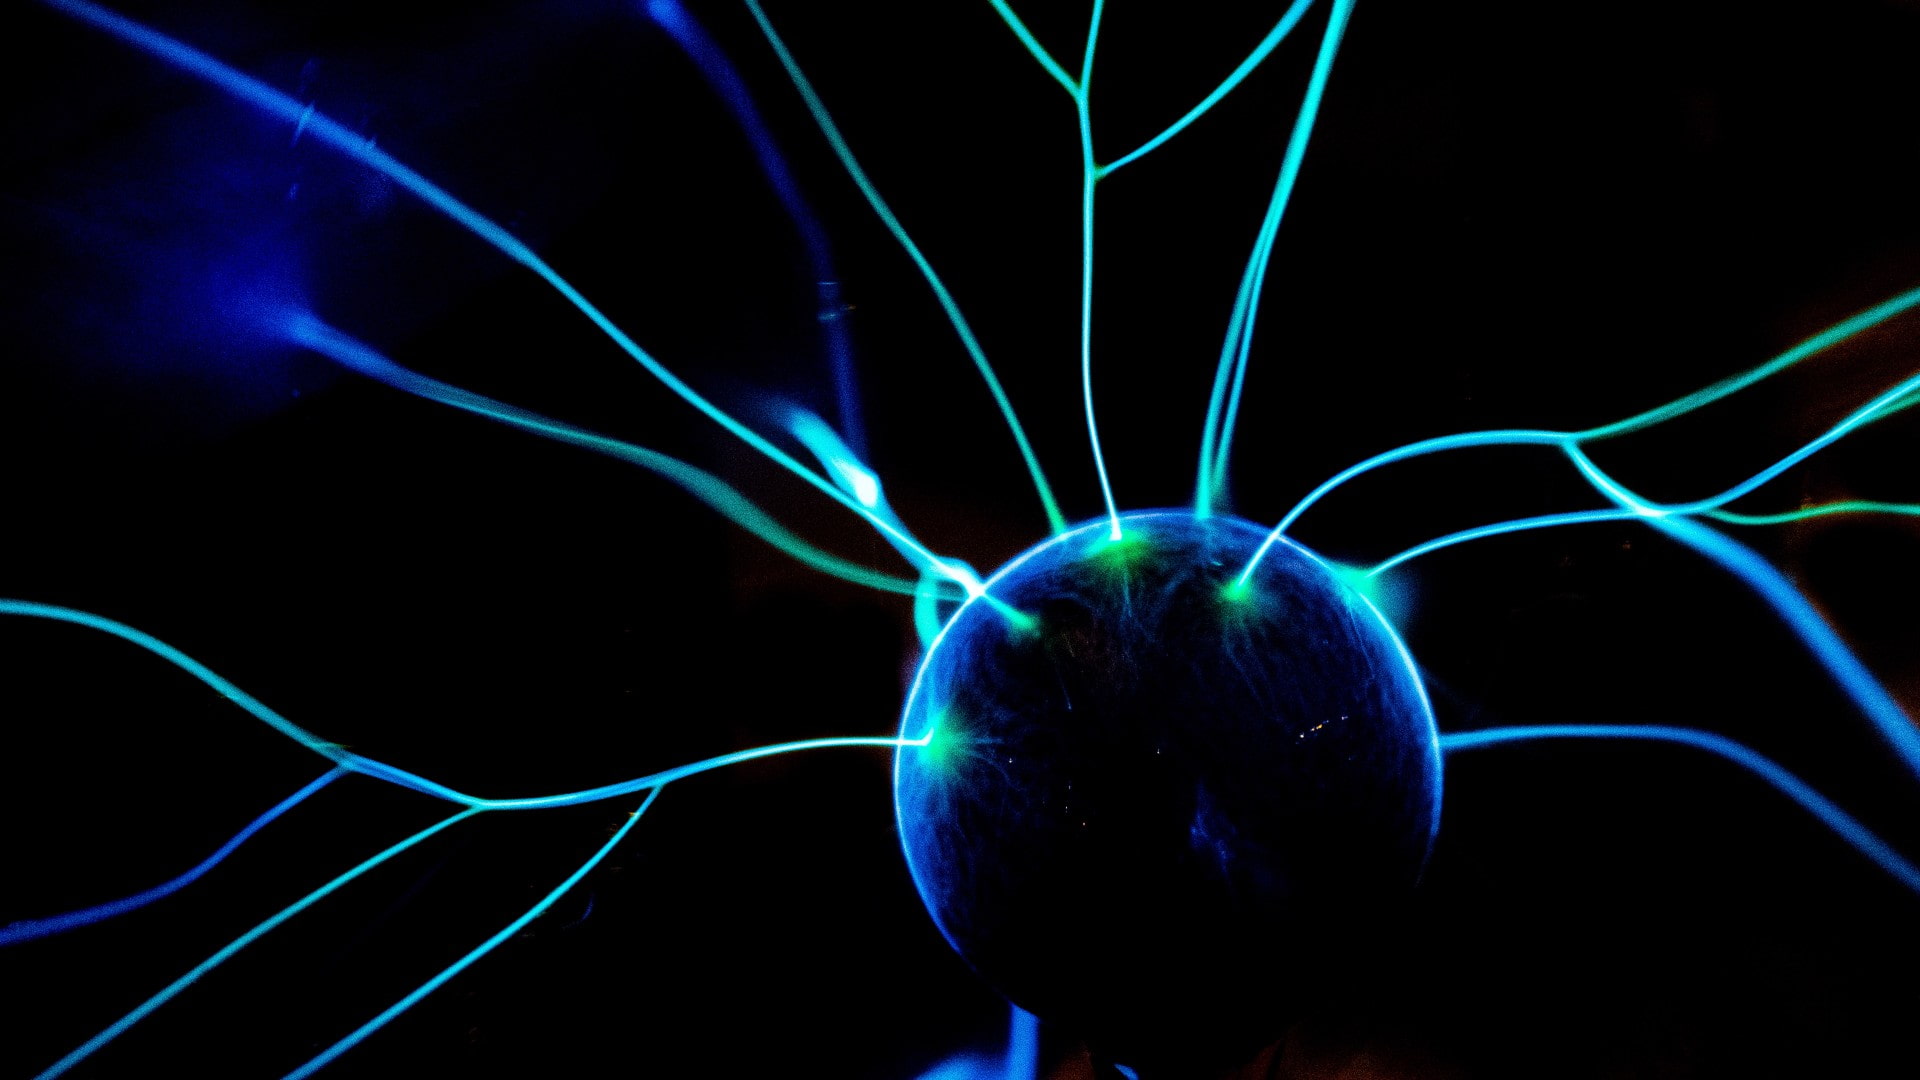 A blue and green ball with tentacles coming out of it on a black background. Photo: Unsplash